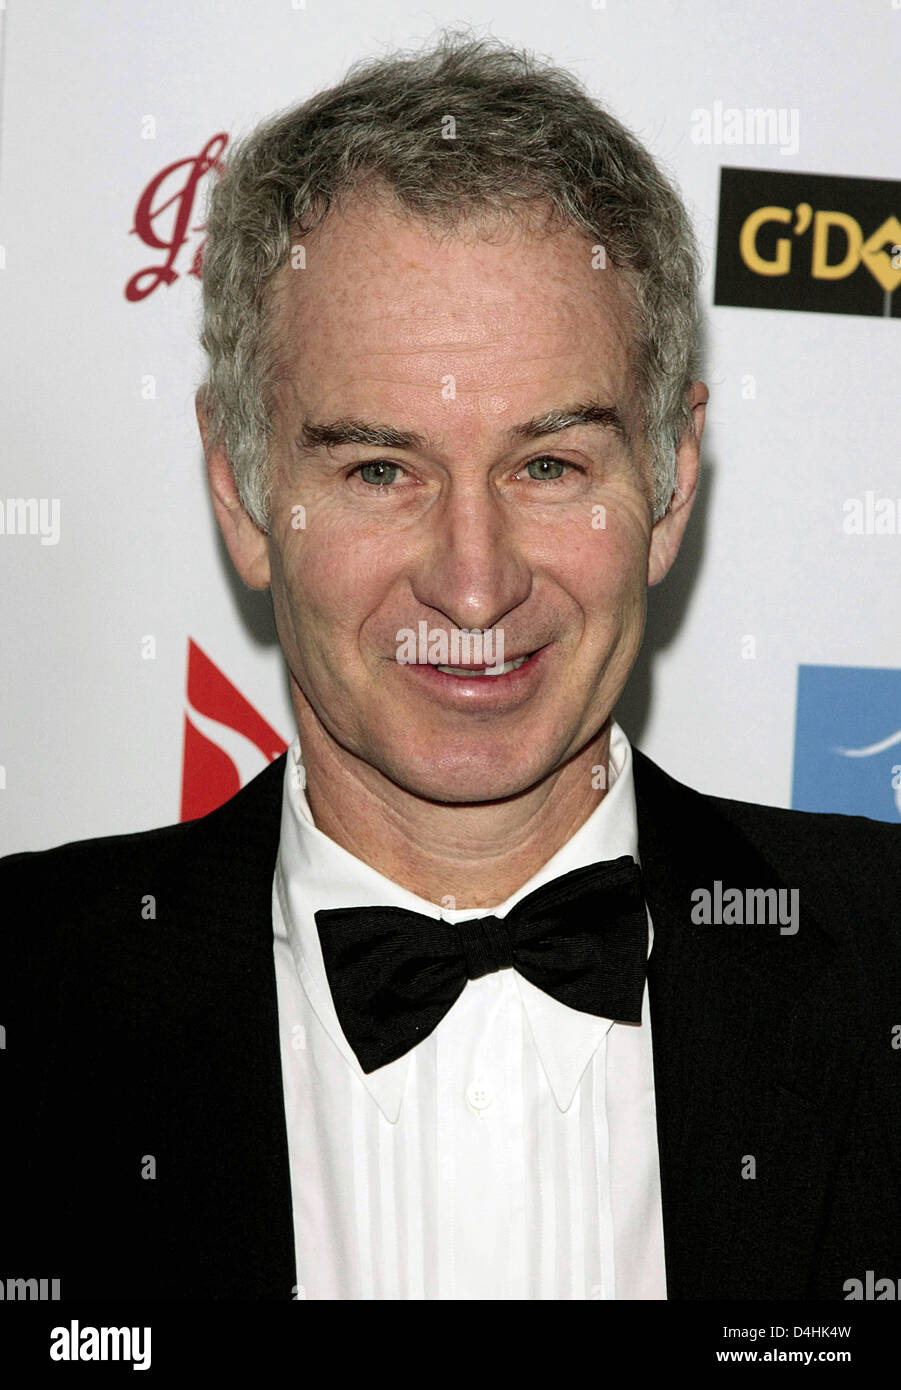 Tennis legend John McEnroe arriving at the G?Day USA - Australia Week 2009 Black Tie Gala at Hotel Renaissance in Los Angeles, 18 January 2009. Australia Week?s signature event, the Black Tie Gala, is a red carpet event that honors high profile individuals for significant contributions in their respective industries and for excellence in promoting Australia in the United States. Ph Stock Photo